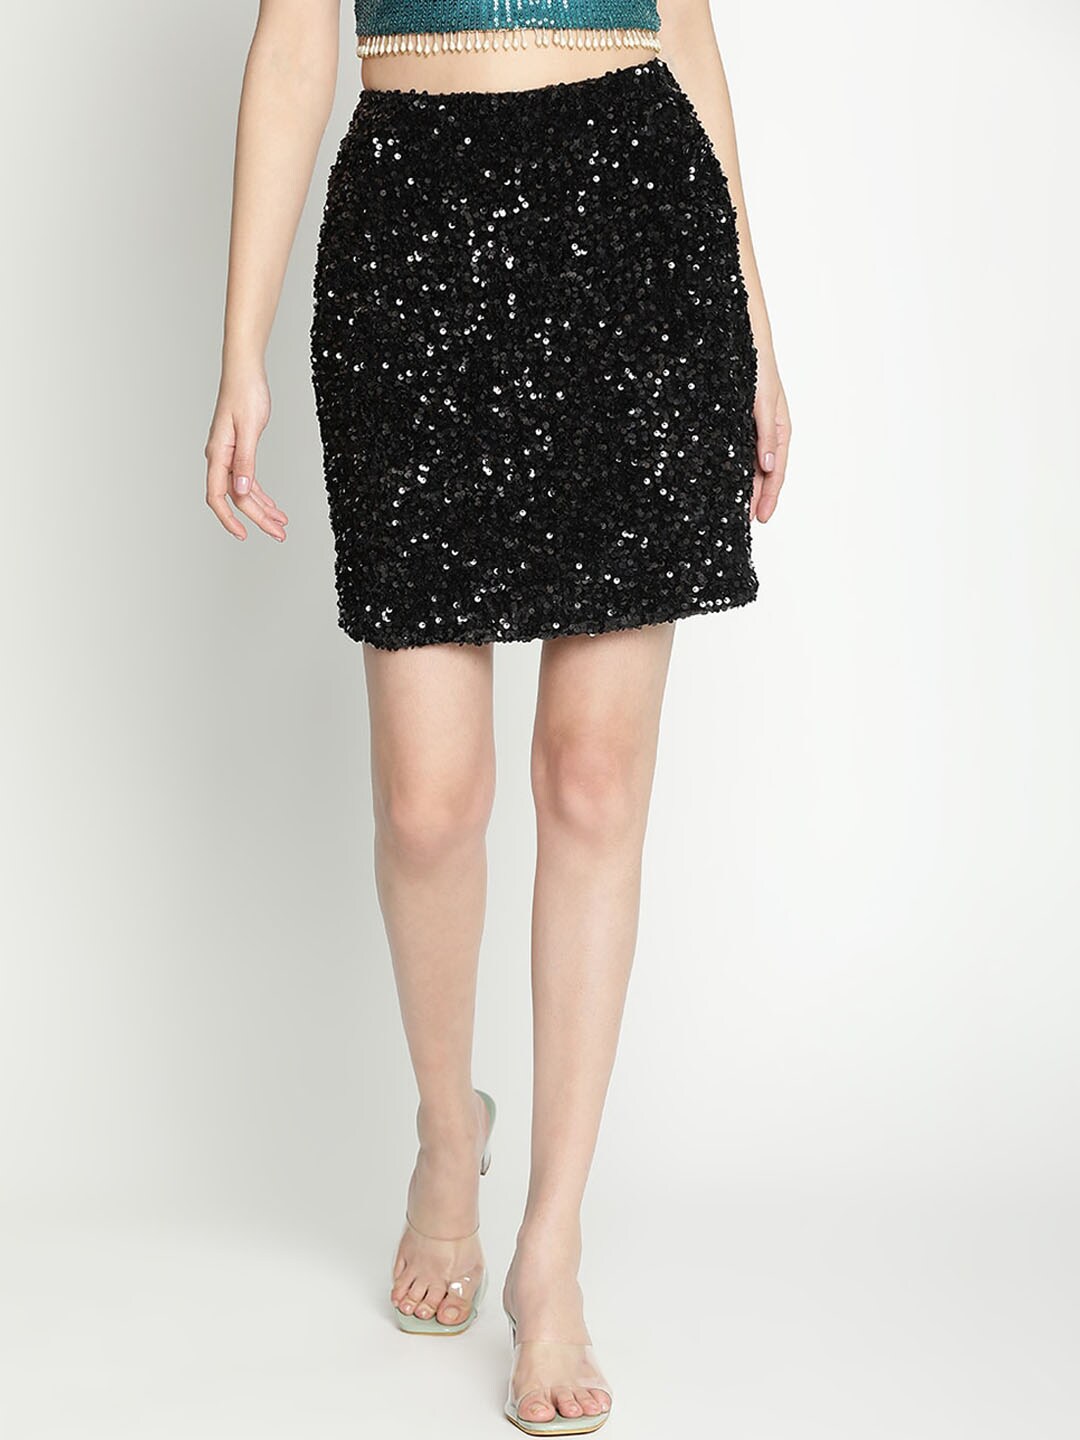 DRAAX Fashions Sequin Embellished A-Line Mini Skirt Price in India